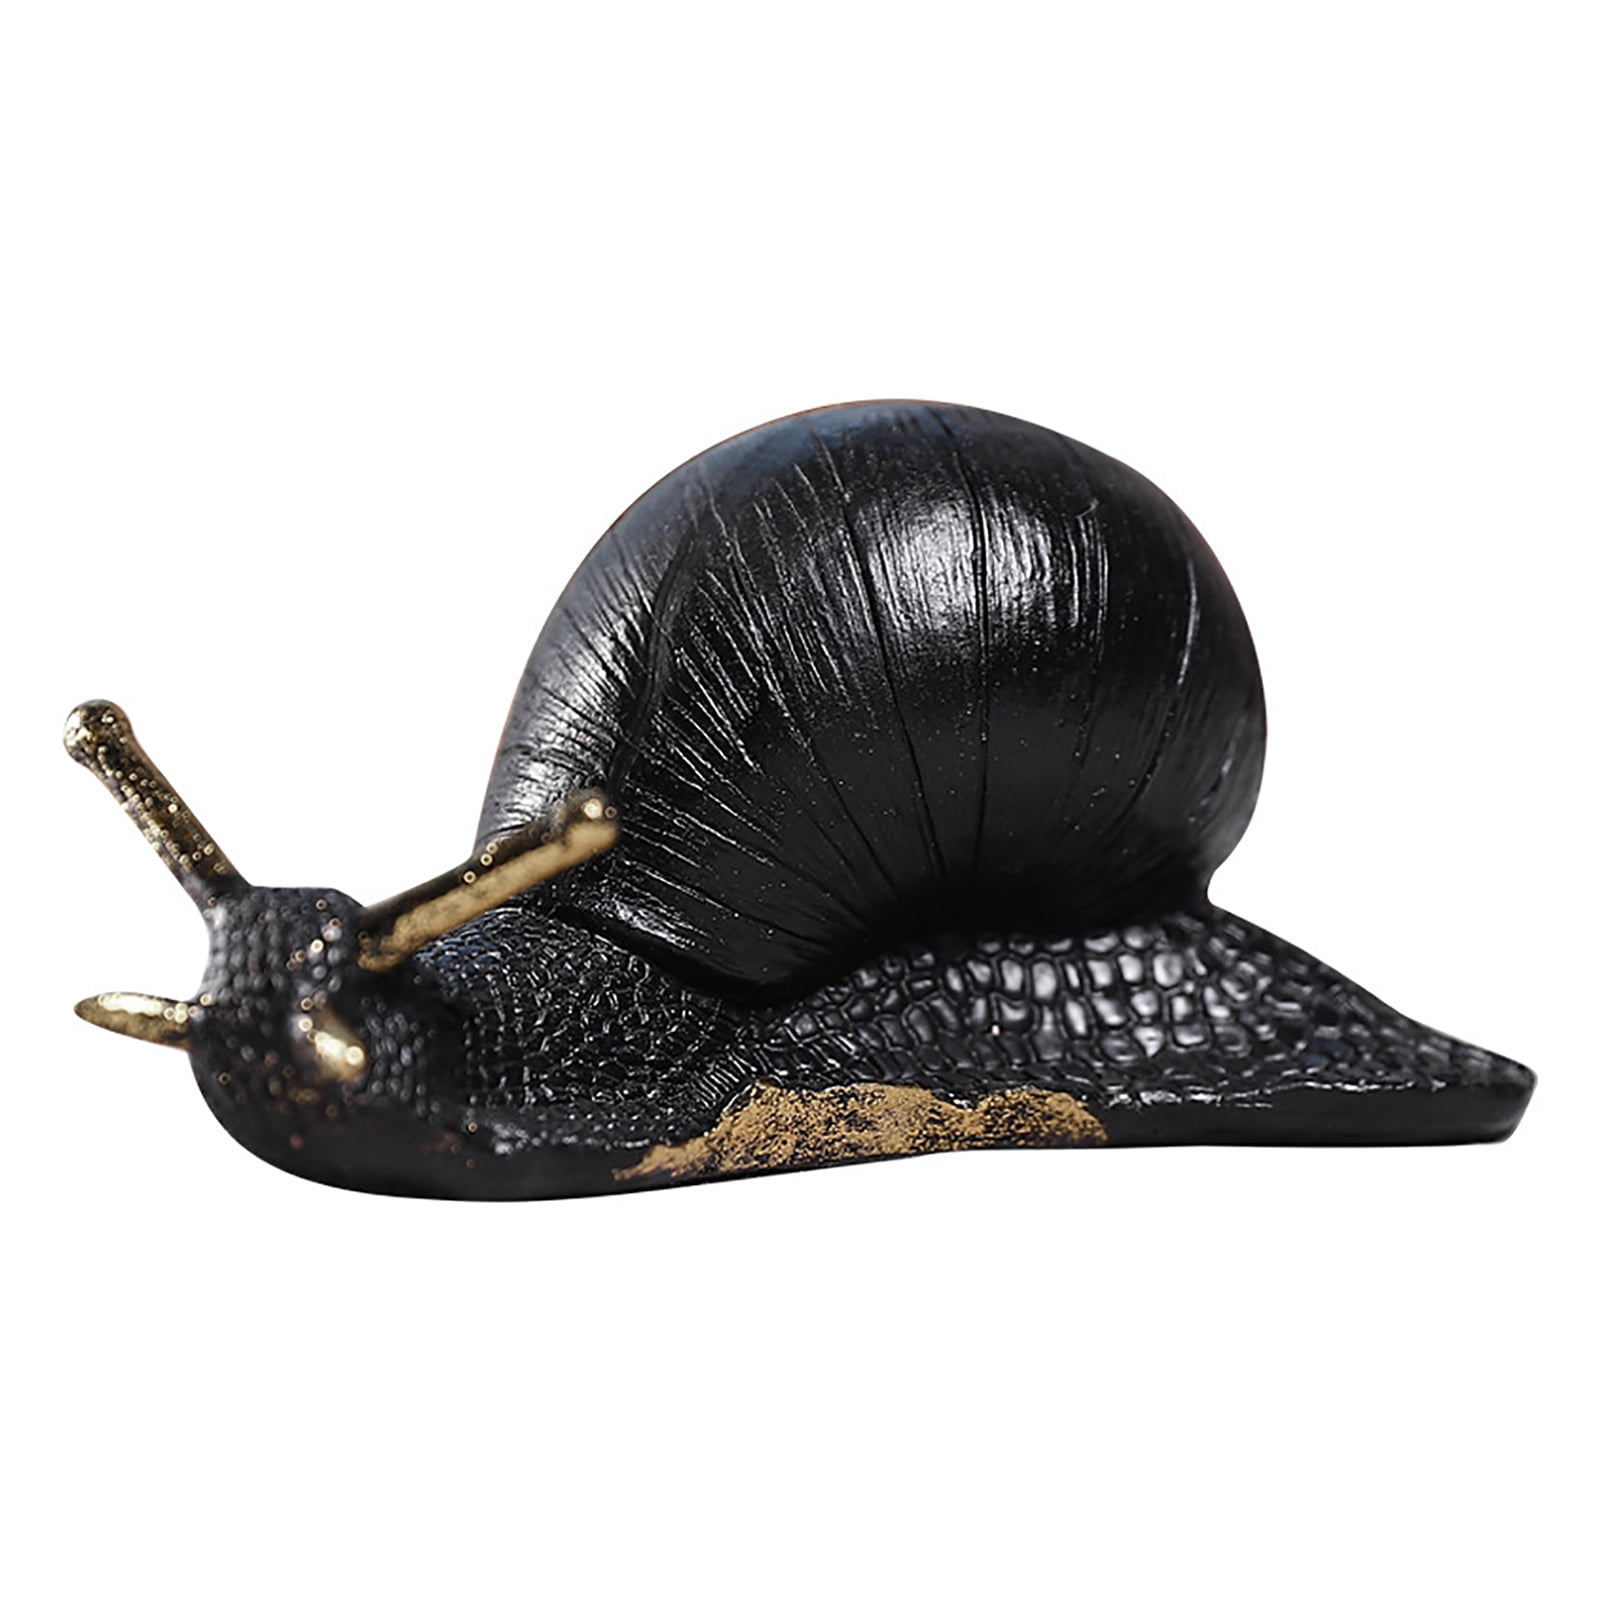 Best Gift for The Buddhist Resin Tree Trunk with Snail Figurine Home/Garden Flower Planter Pot